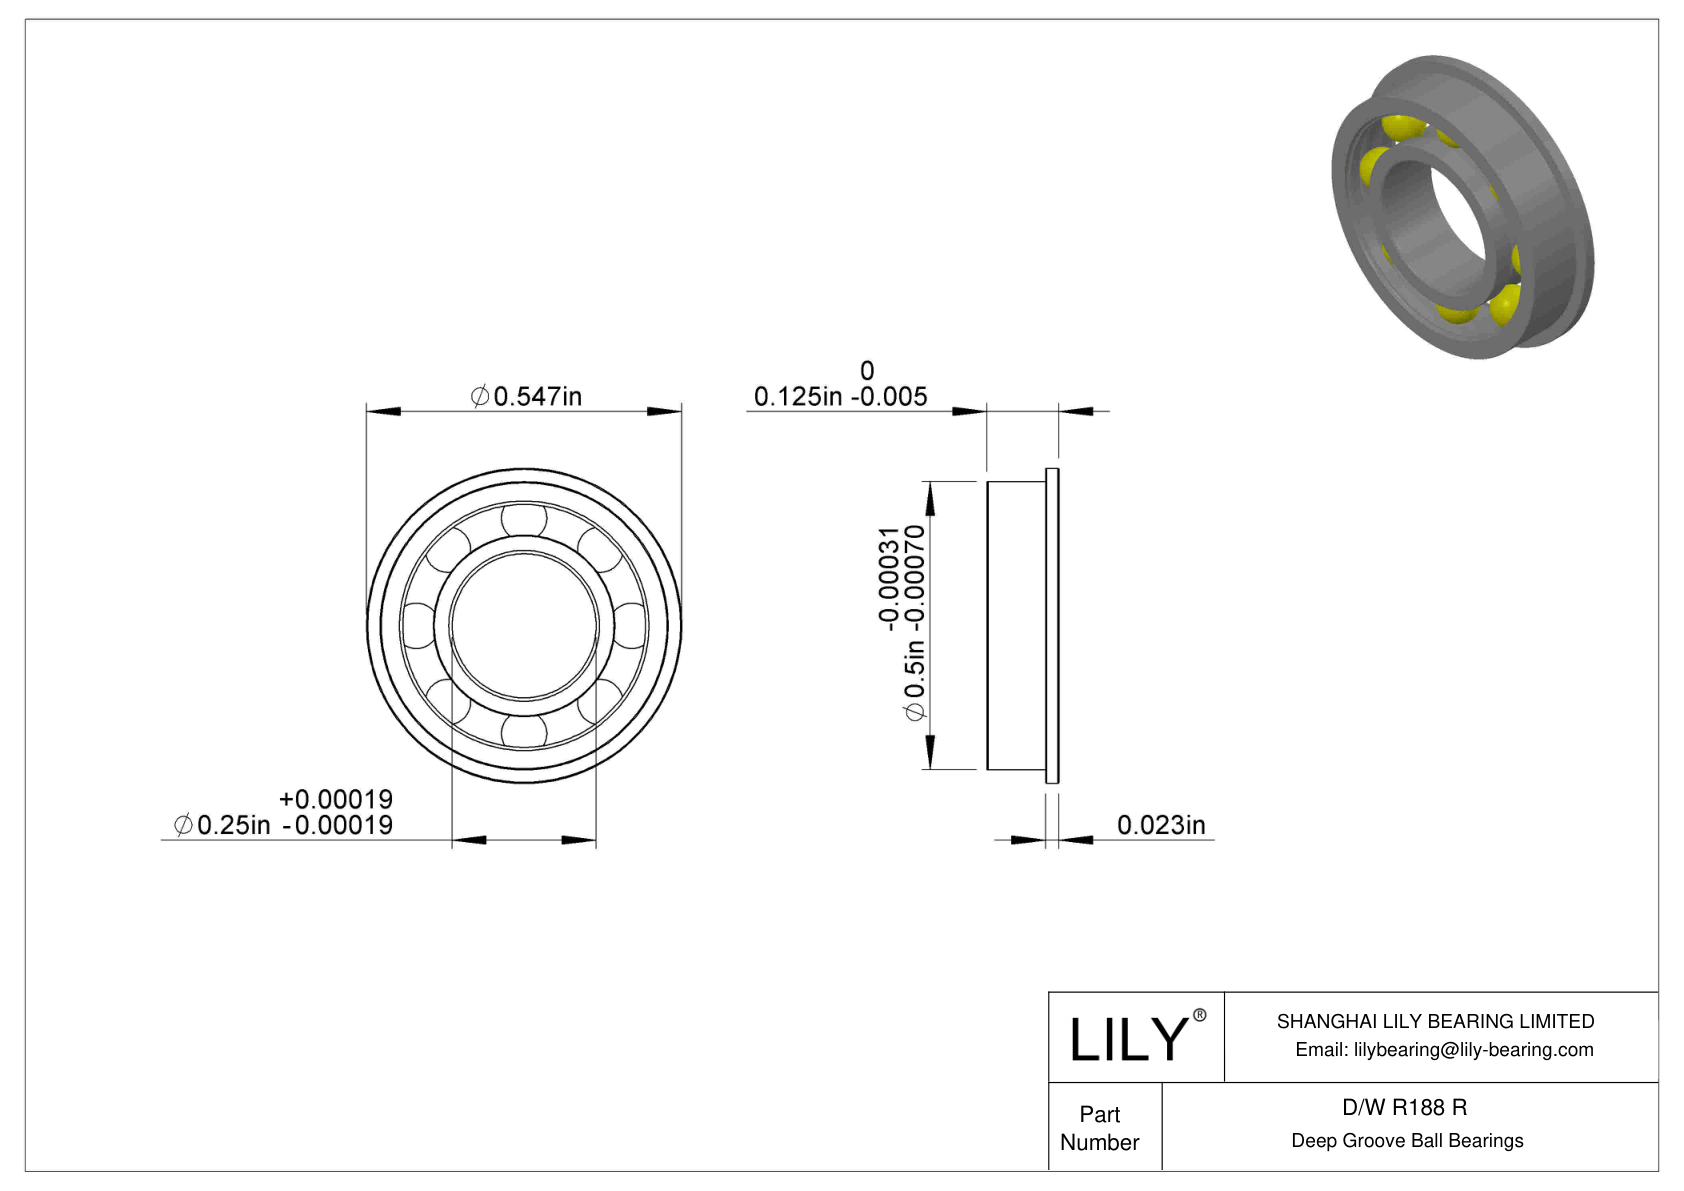 D/W R188 R Flanged Ball Bearings cad drawing